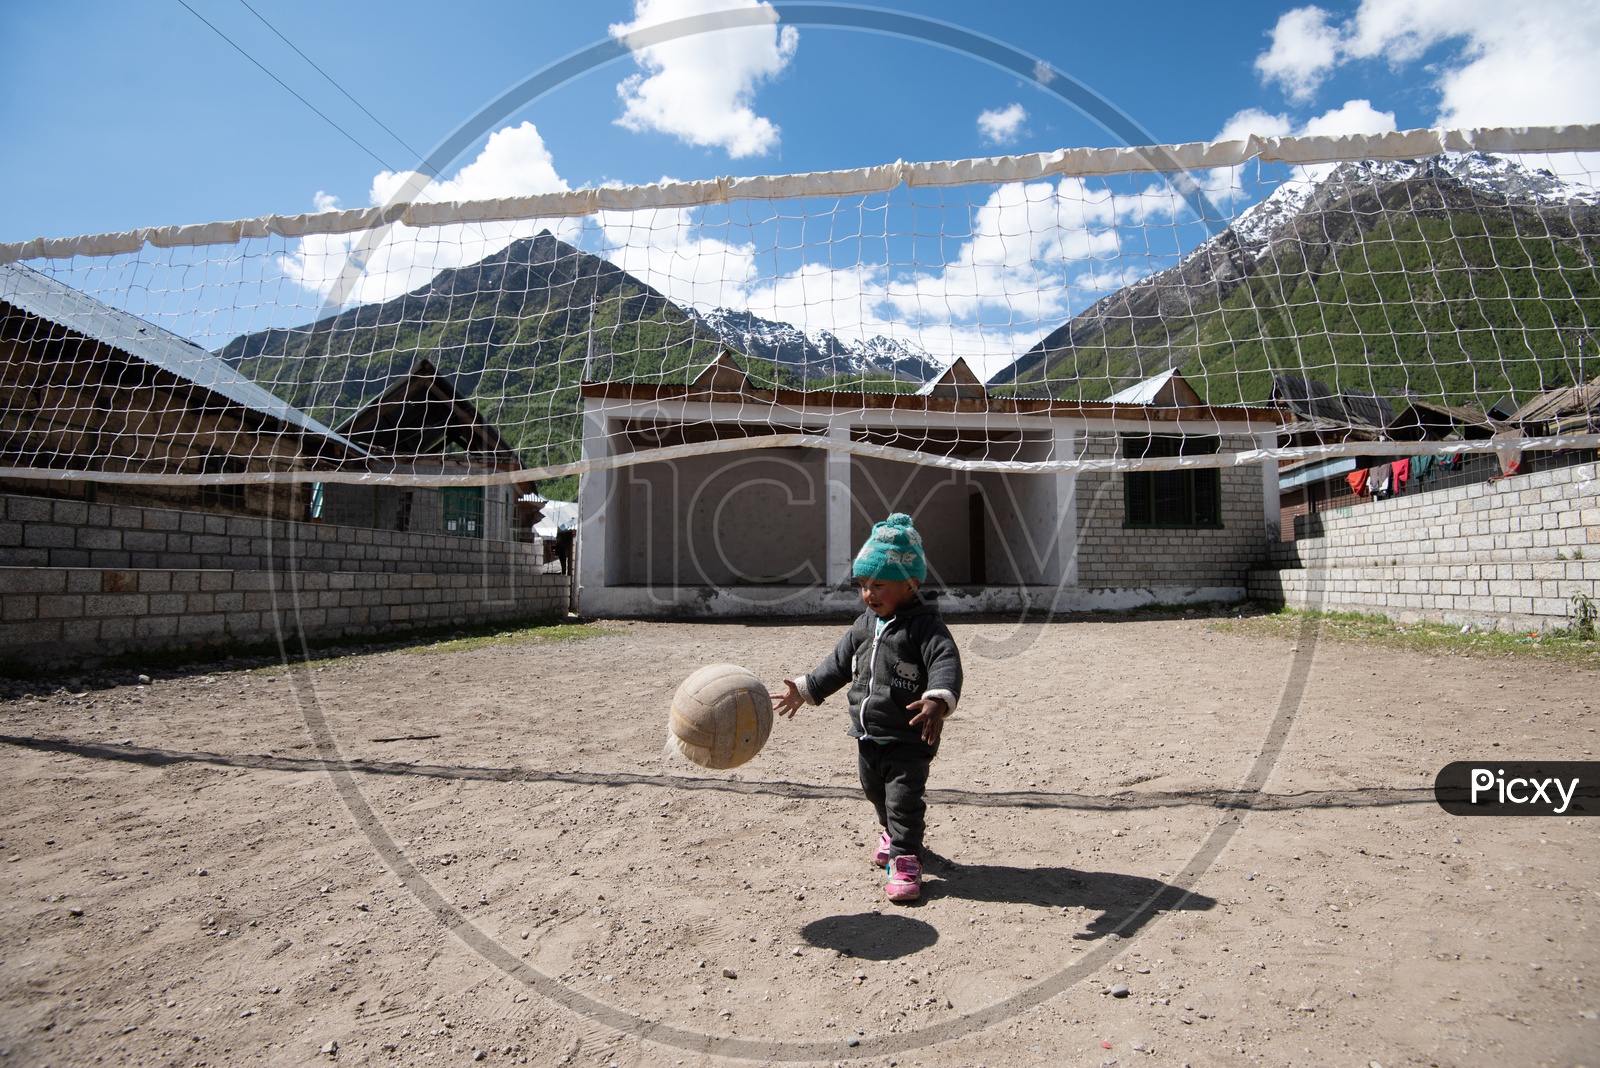 Cute little kid playing with Volley Ball